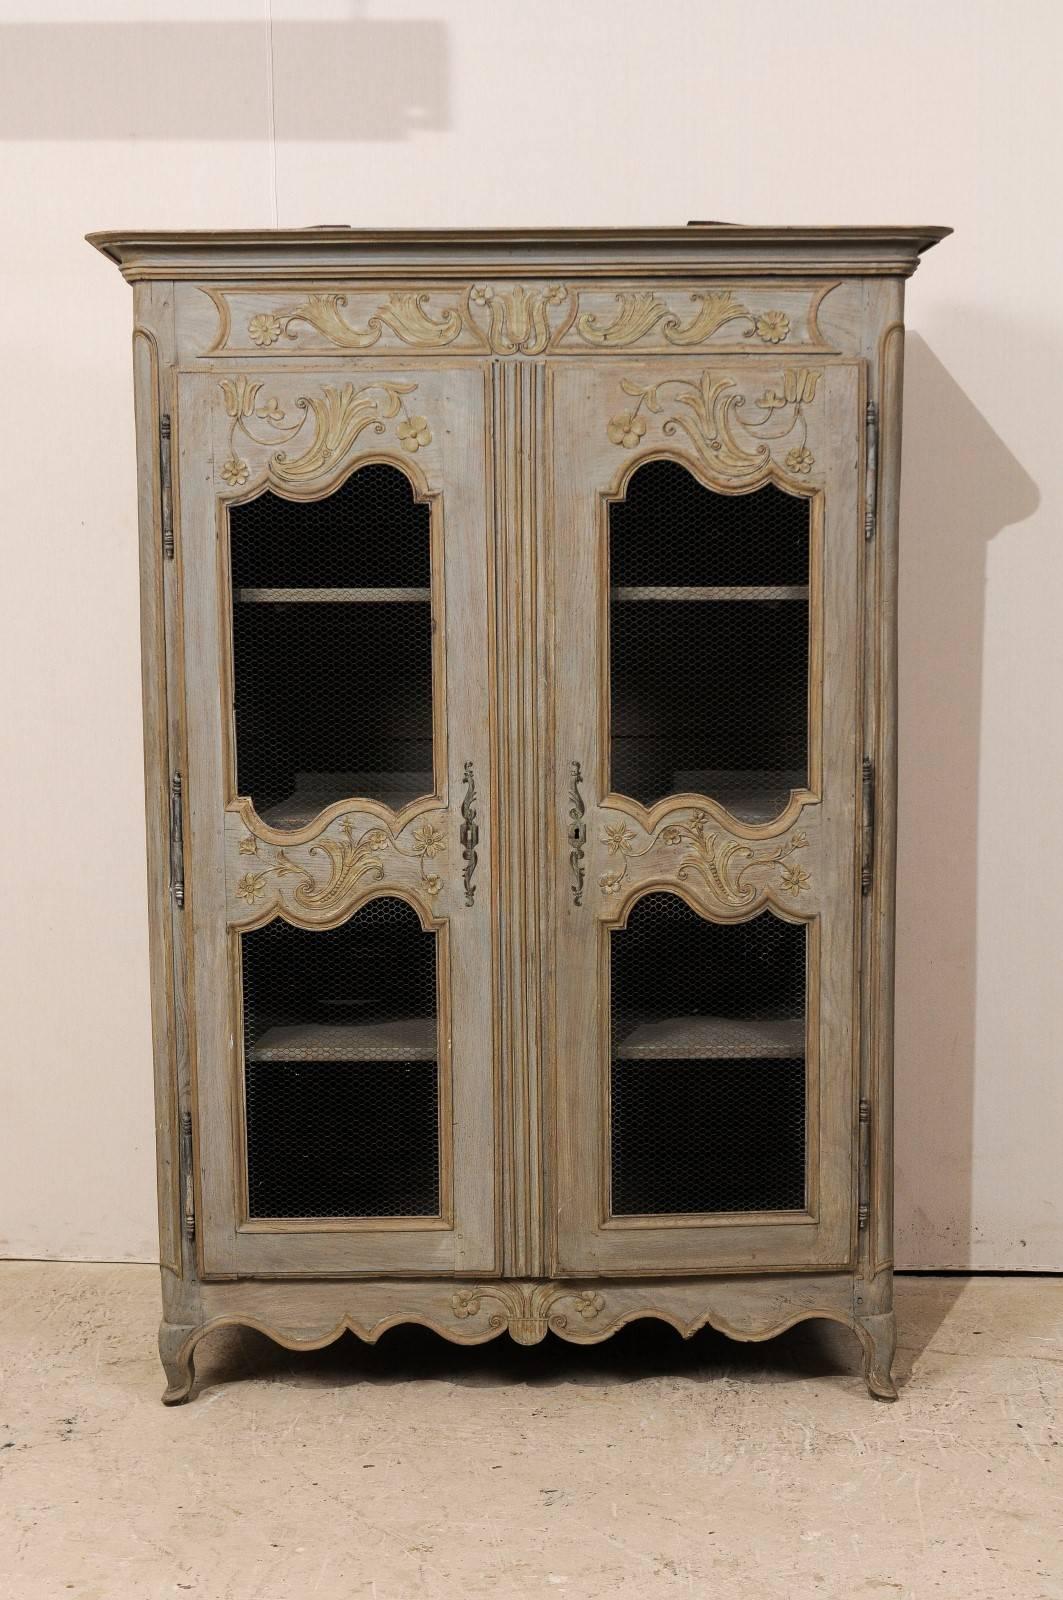 A French painted wood two-door cabinet. This French cabinet from the early 20th century features an elegantly carved floral motif about the top and bottom rails, as well as the upper and mid-section of the doors. The cabinet sides are double